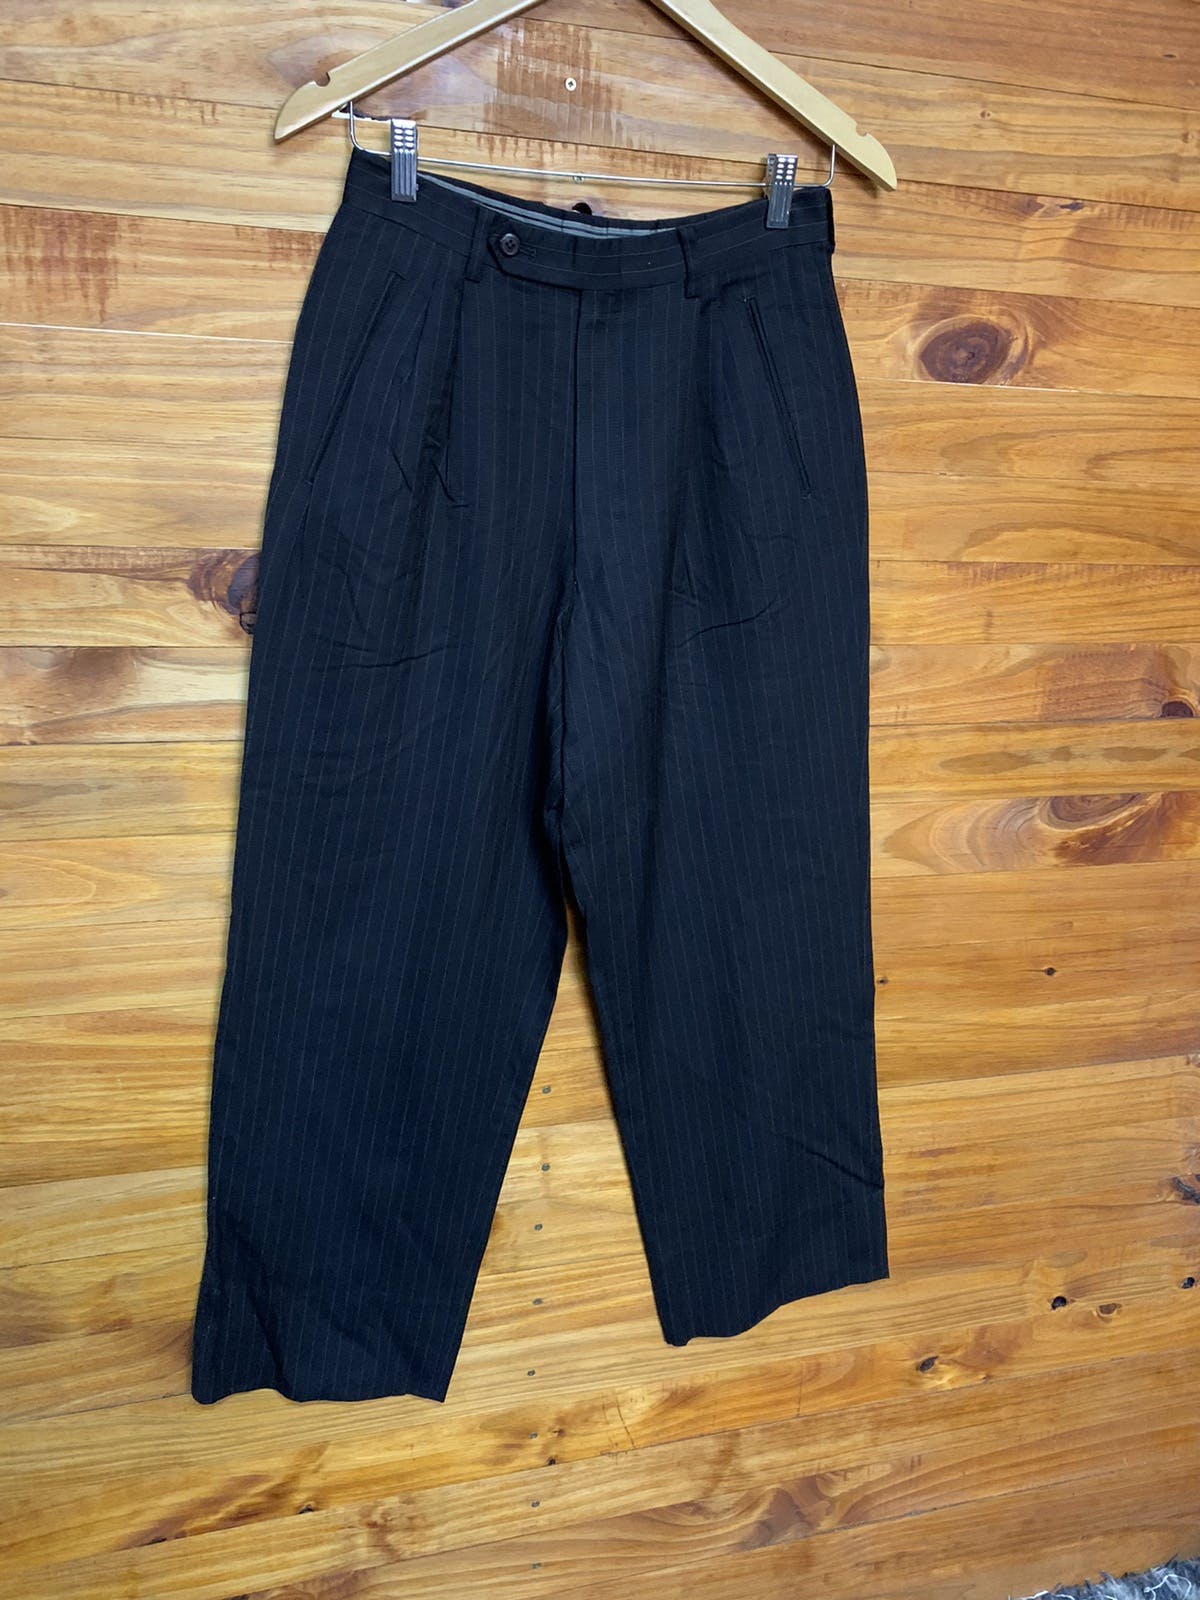 Vintage Moschino Trouser Pants - 3